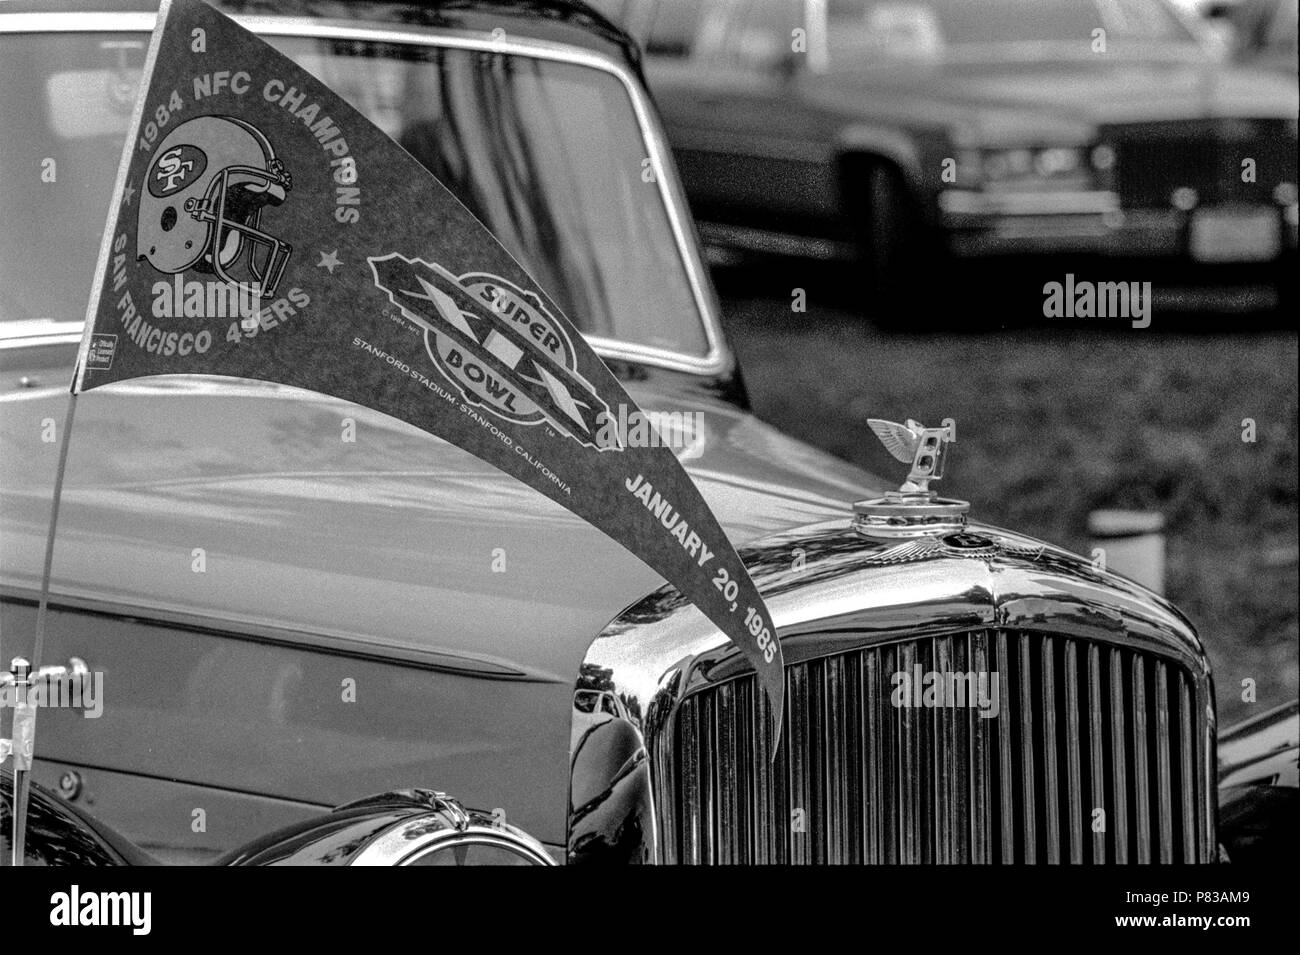 Stanford, California, USA. 20th Jan, 1985. A Bentley with NFC Championship pennant in the parking lot at the Super Bowl XIX tailgate on the Stanford University campus. The San Francisco 49ers defeated the Miami Dolphins 38-16 on Sunday, January 20, 1985. Credit: Al Golub/ZUMA Wire/Alamy Live News Stock Photo